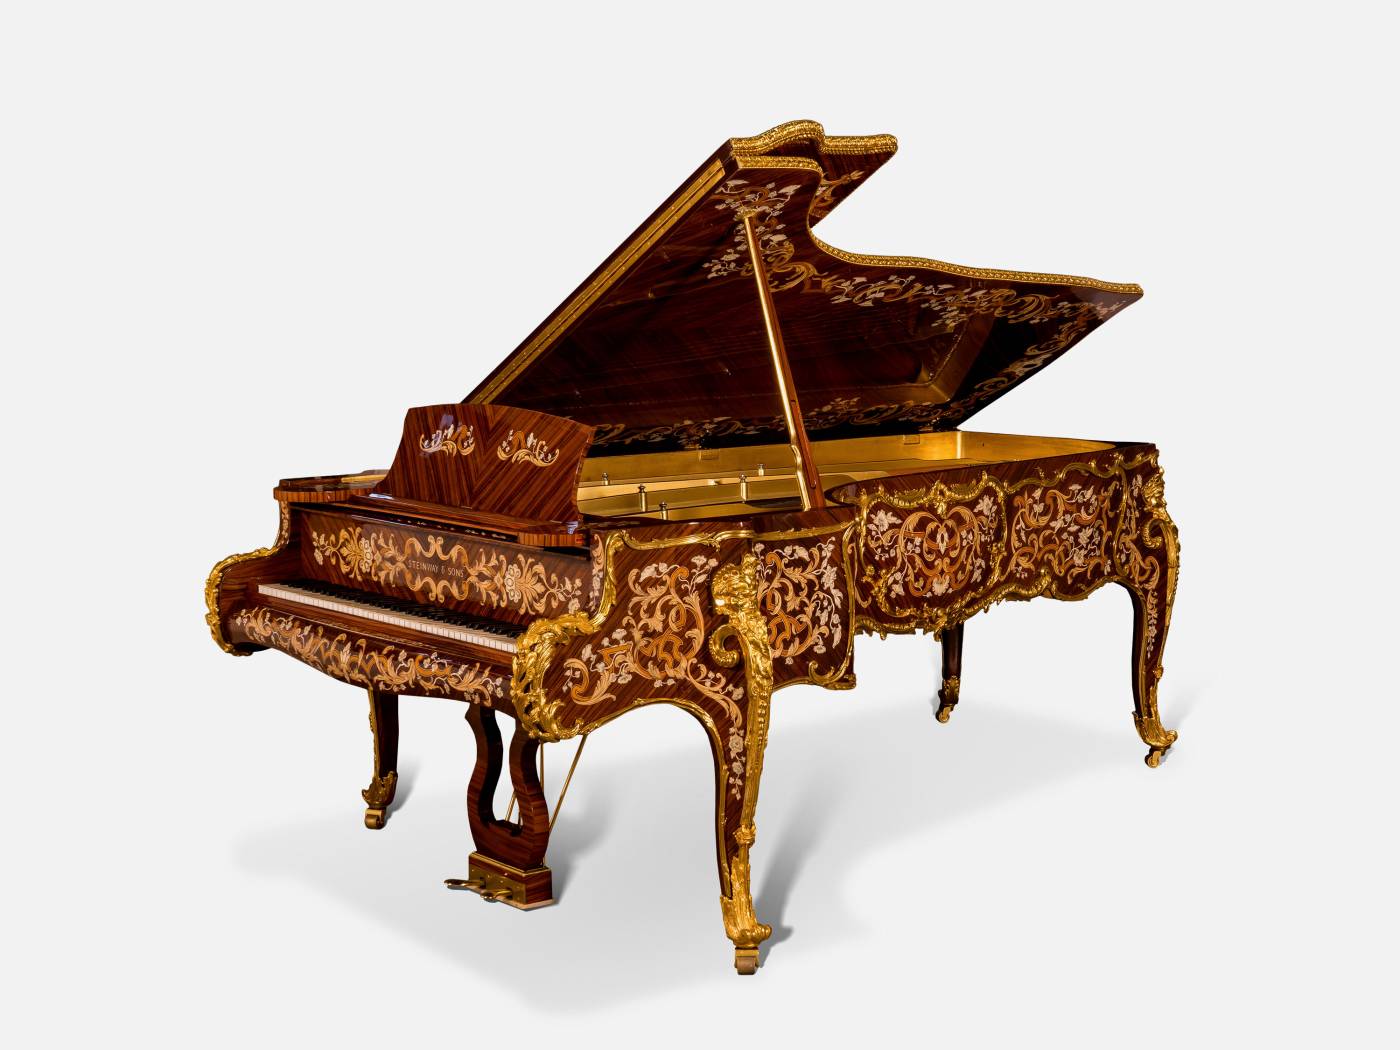 ART. 2705 – Discover the elegance of luxury classic Pianos made in Italy by C.G. Capelletti. Luxury classic furniture that combines style and craftsmanship.